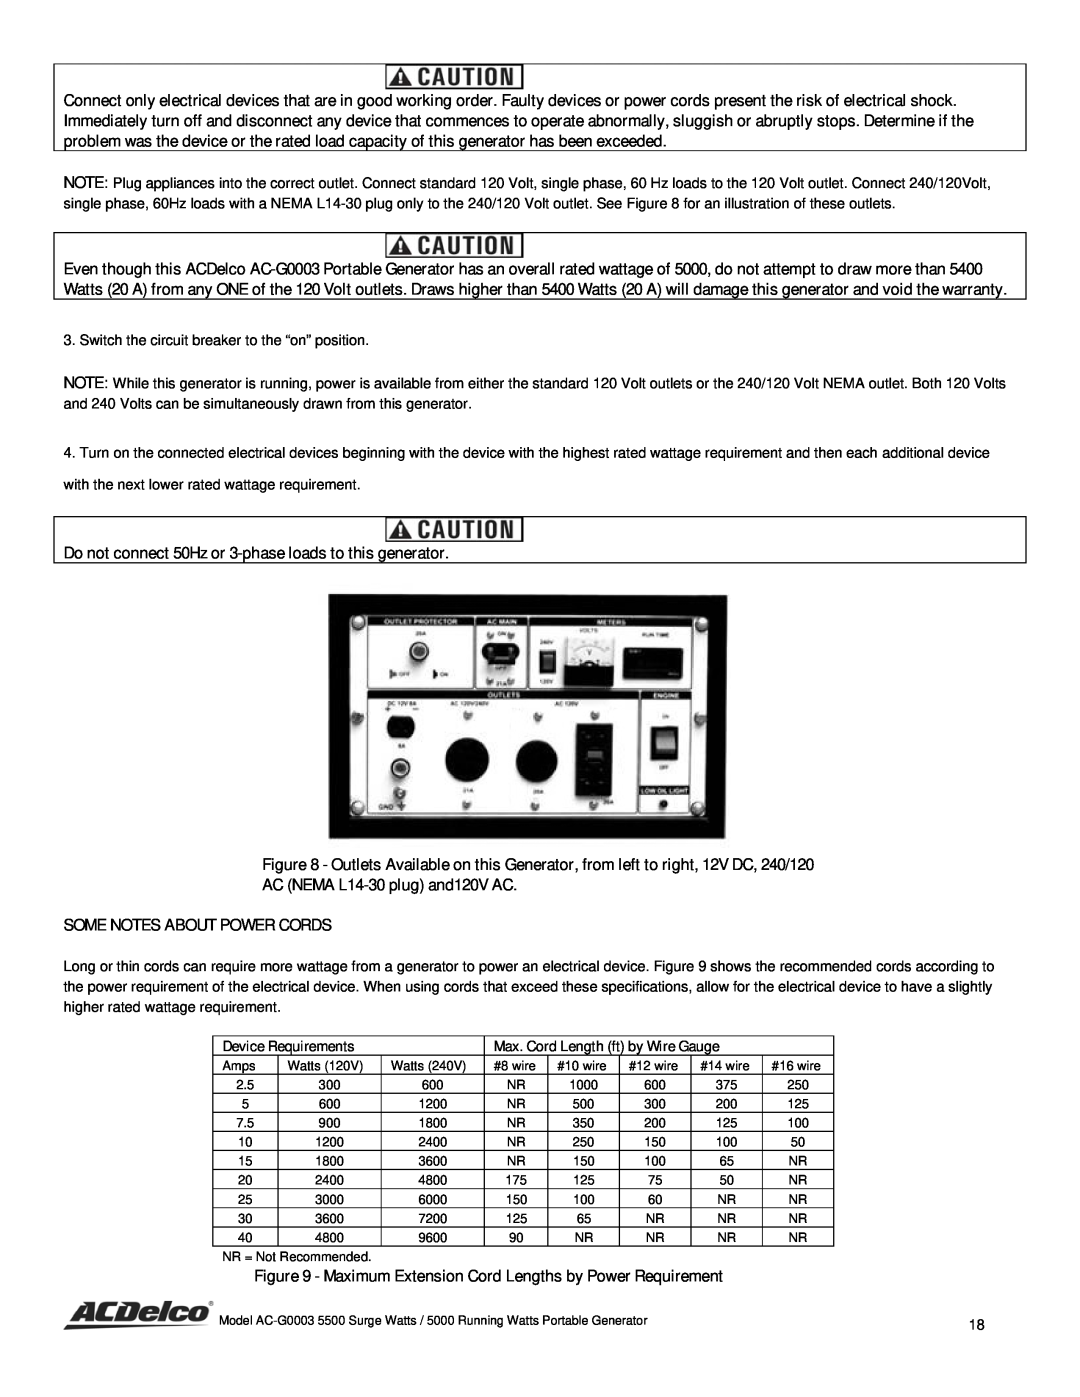 ACDelco AC-G0003 instruction manual AC NEMA L14-30plug and120V AC, Some Notes About Power Cords 